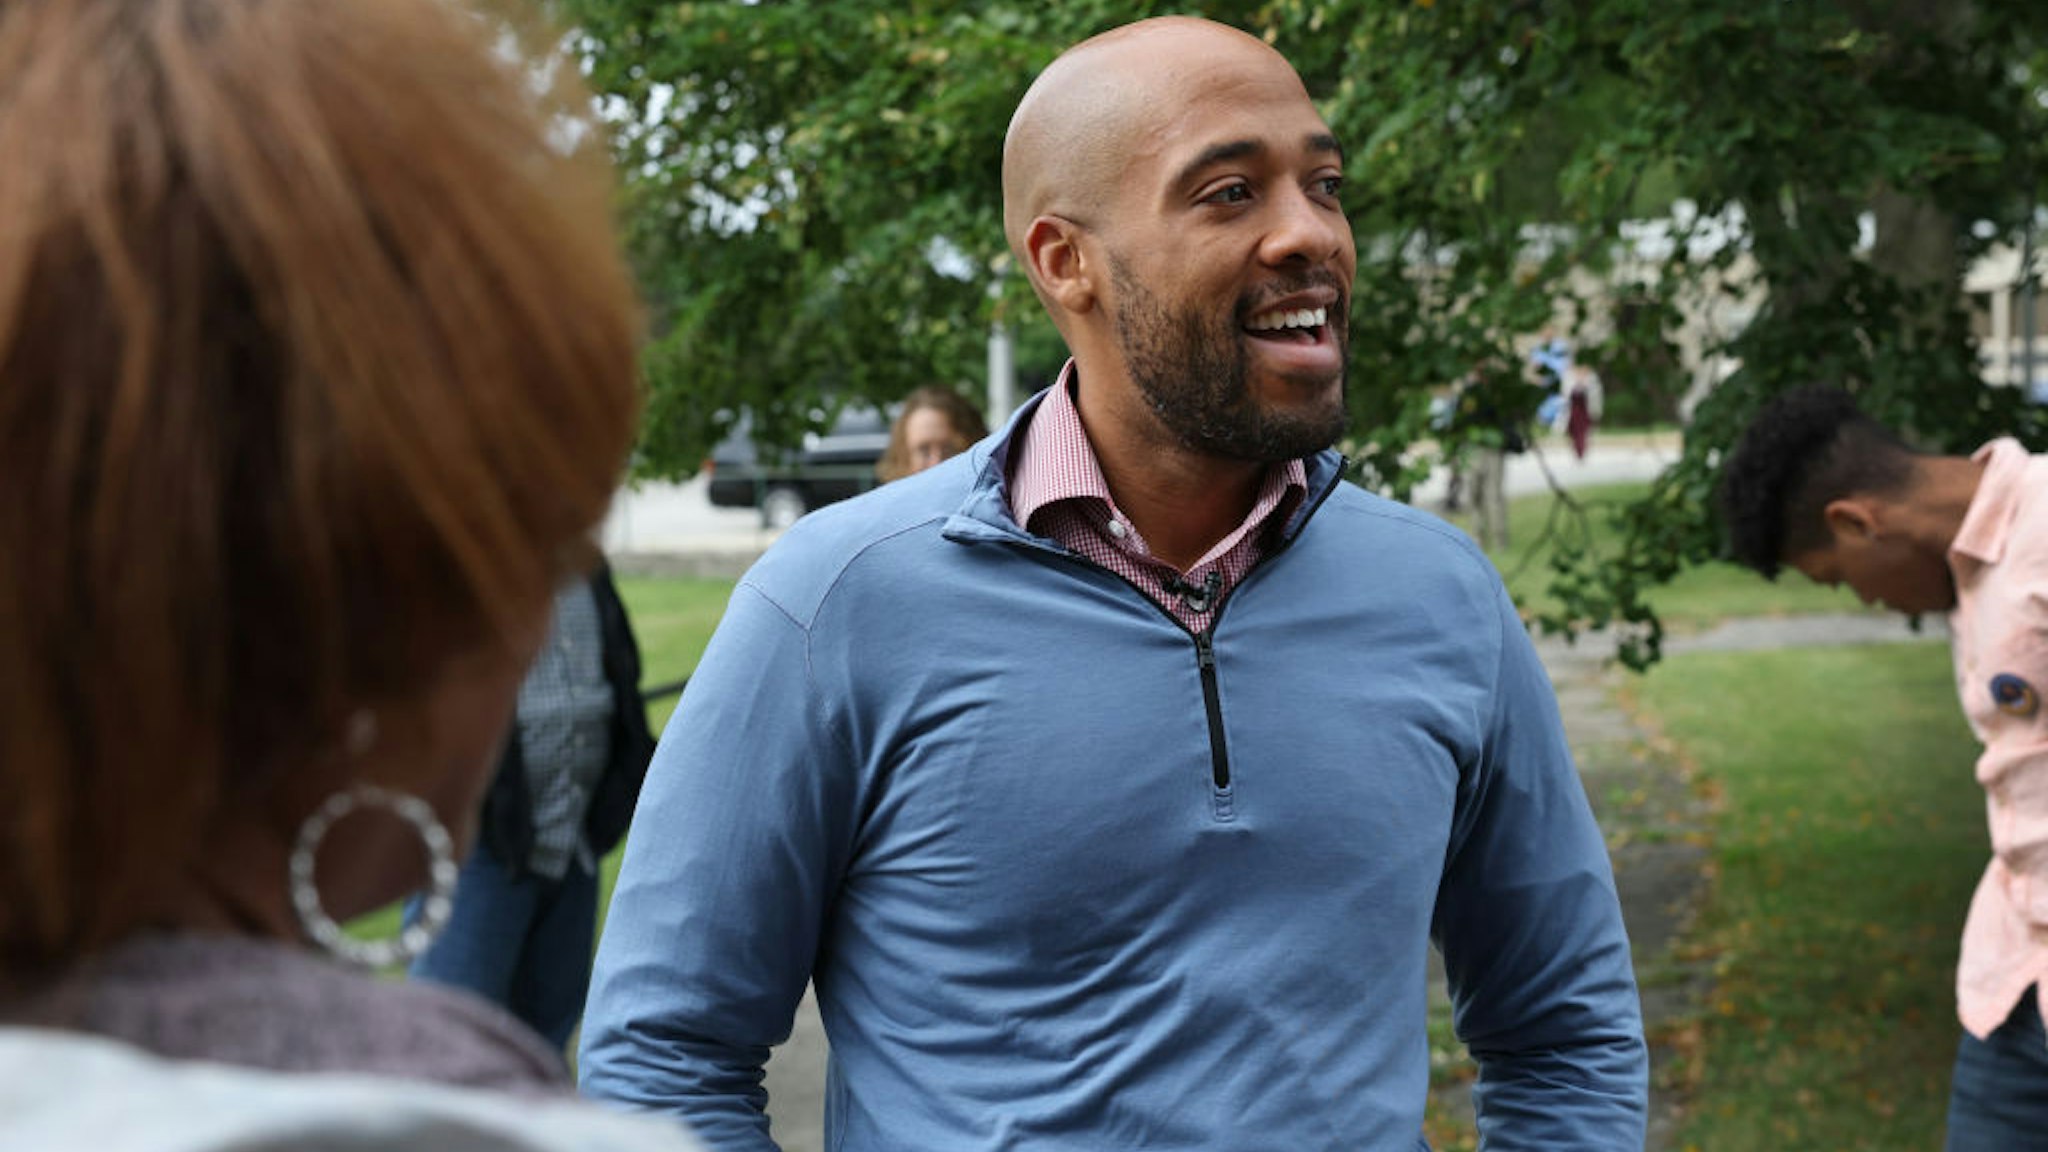 MILWAUKEE, WISCONSIN - SEPTEMBER 24: Democratic candidate for U.S. senate in Wisconsin Mandela Barnes speaks to supporters as he arrives for a campaign rally at the Washington Park Senior Center on September 24, 2022 in Milwaukee, Wisconsin. Barnes currently serves as the state's lieutenant governor.